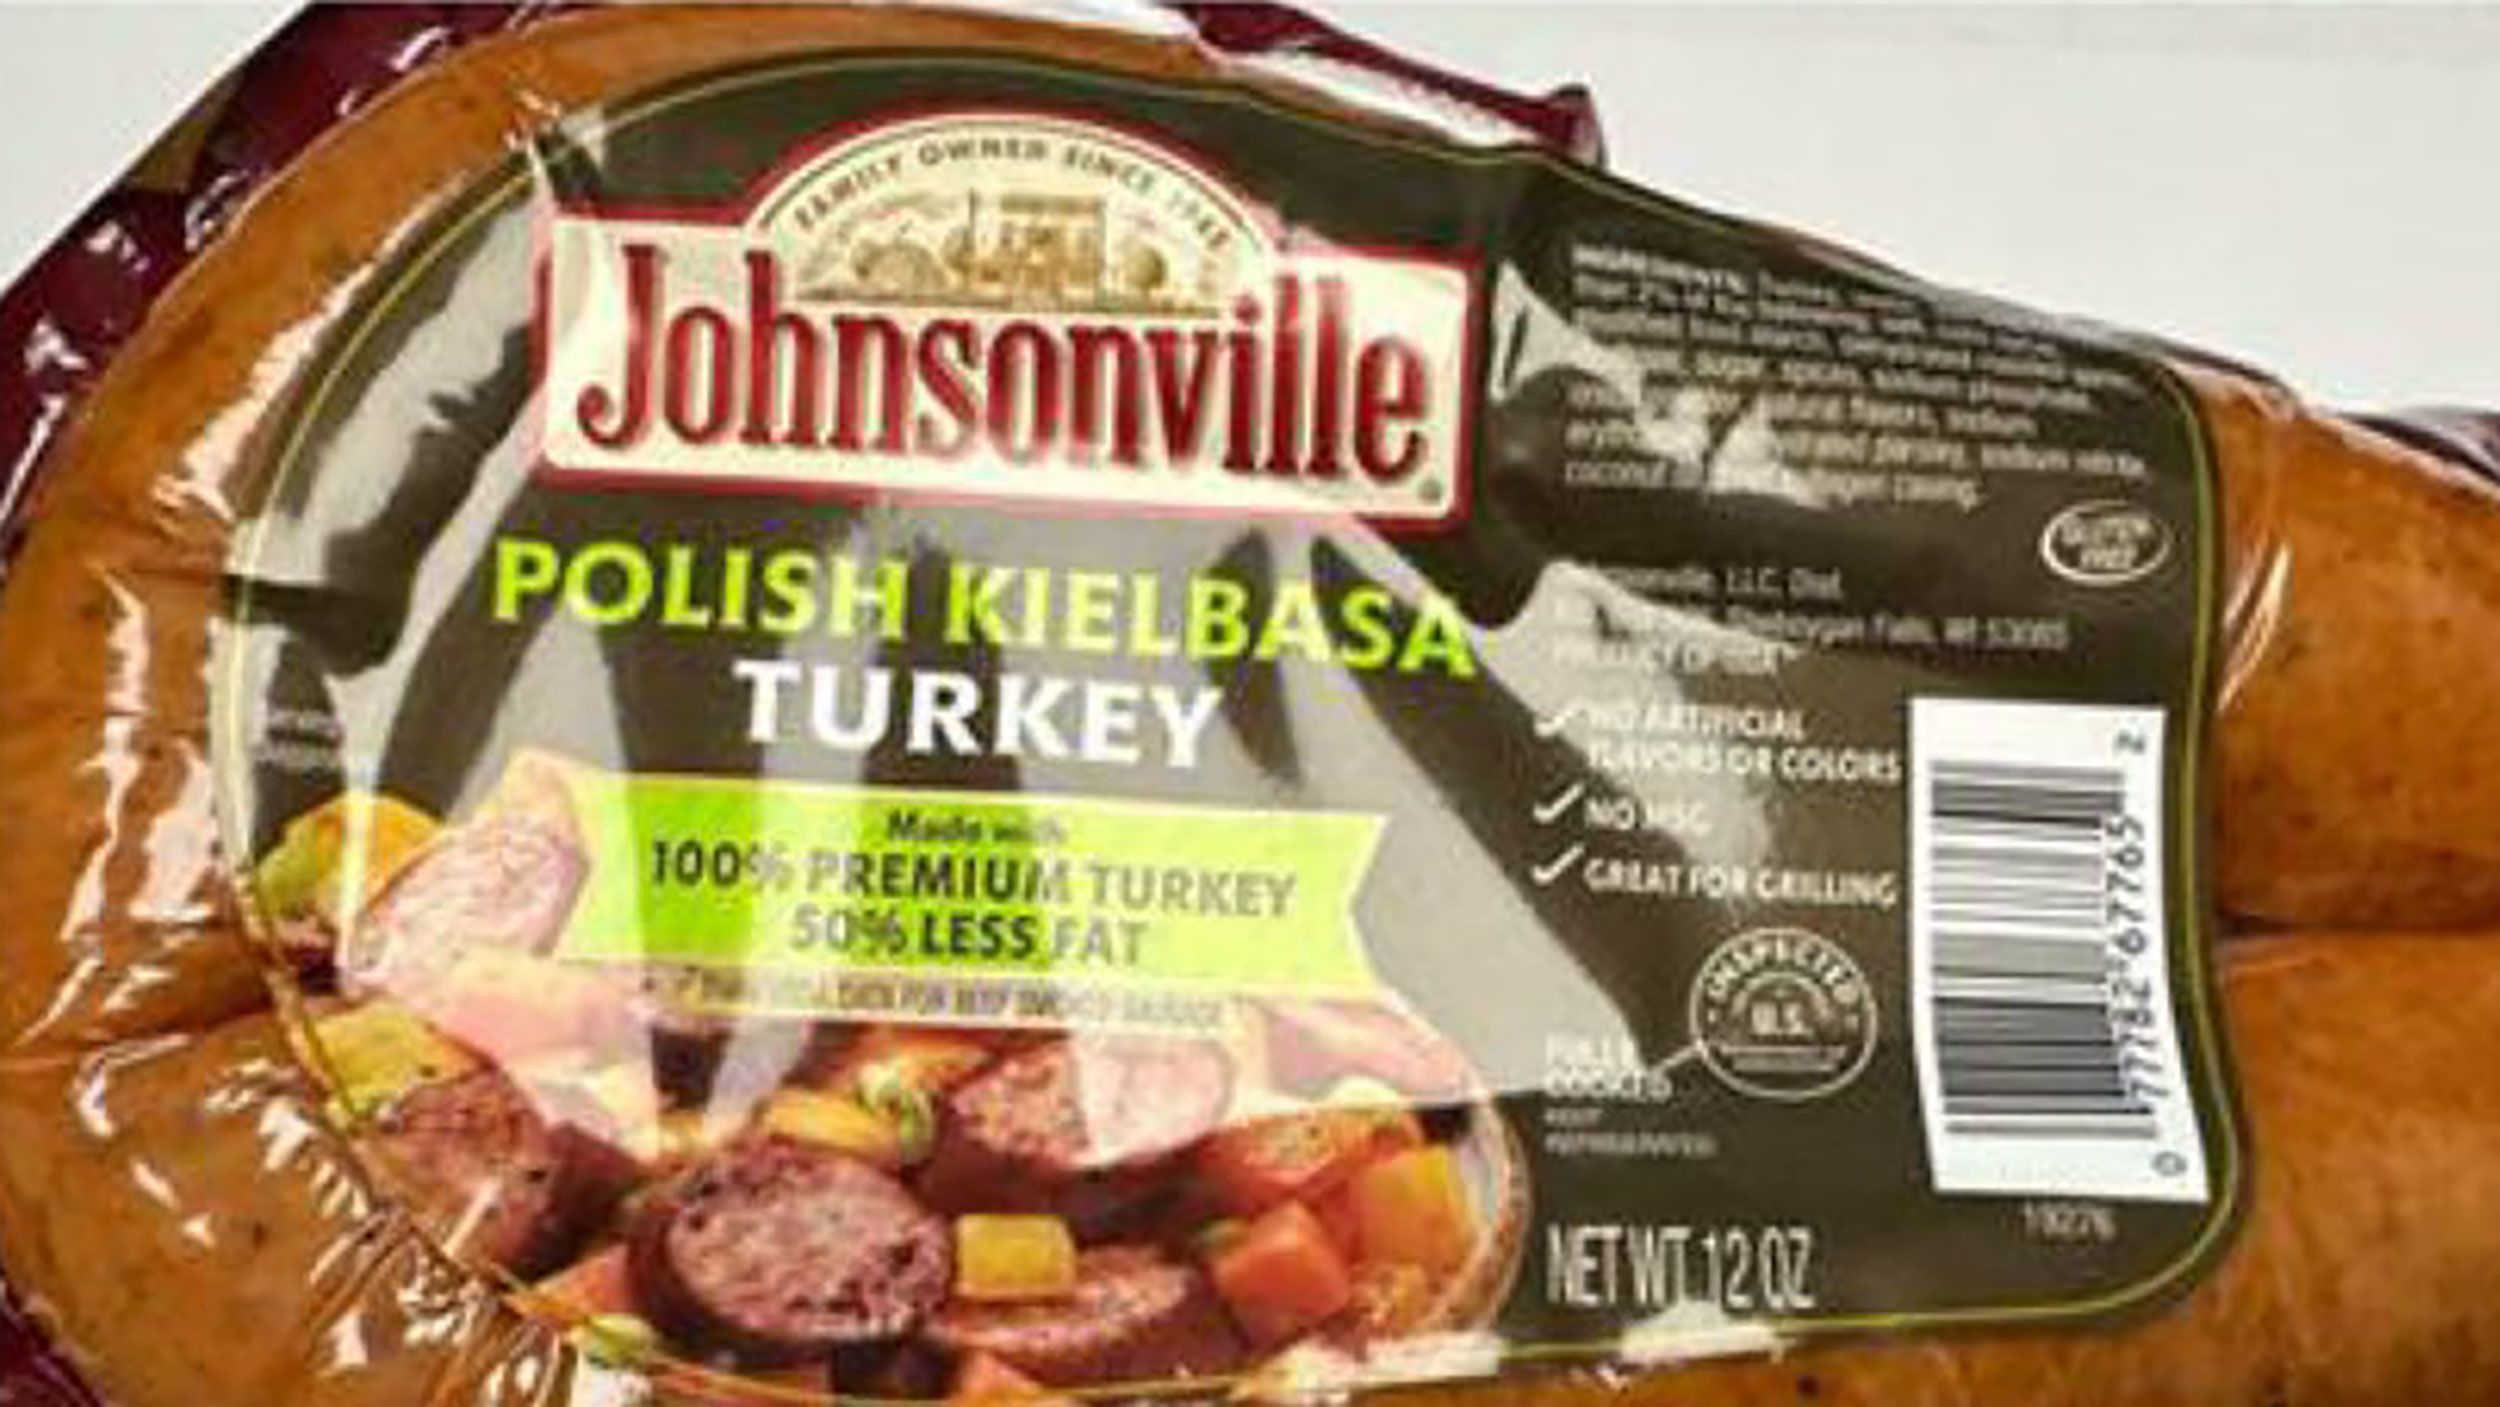 Johnsonville kielbasa sausage recalled due to contamination with rubber pieces - Food and Cooking - News